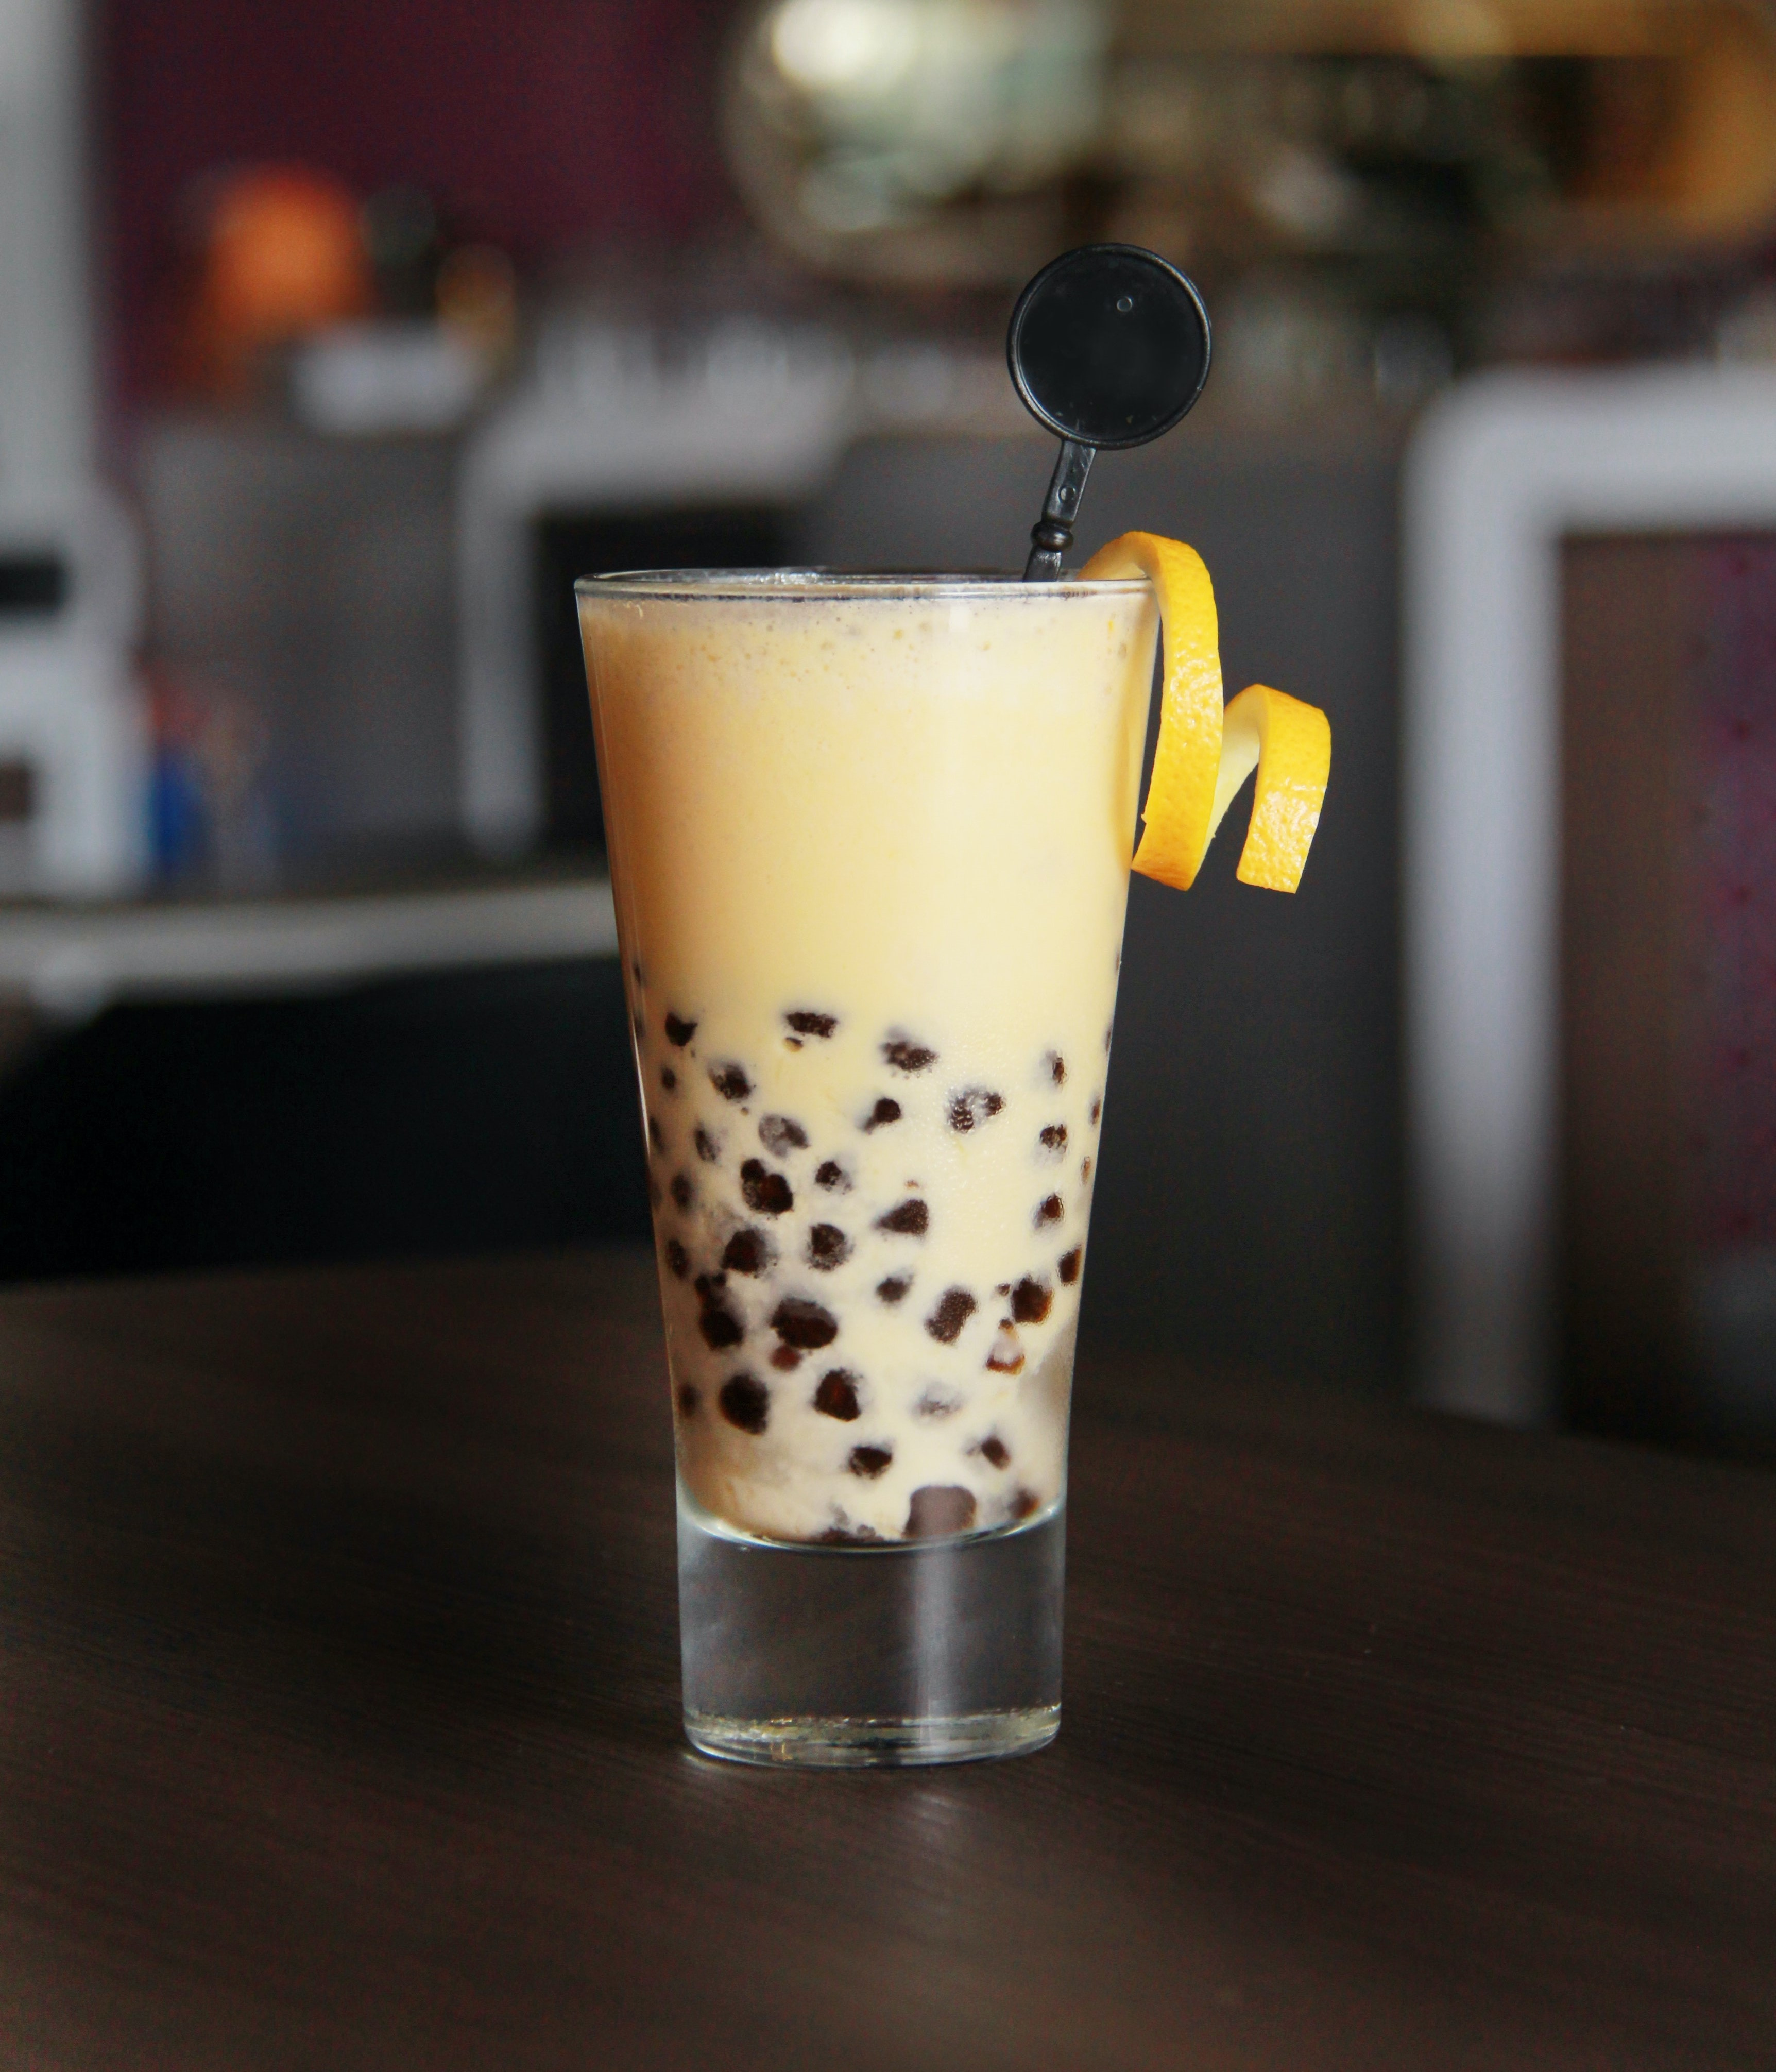 Growing Bubble Boba Tea Store,  Absentee Run, Franchise Support